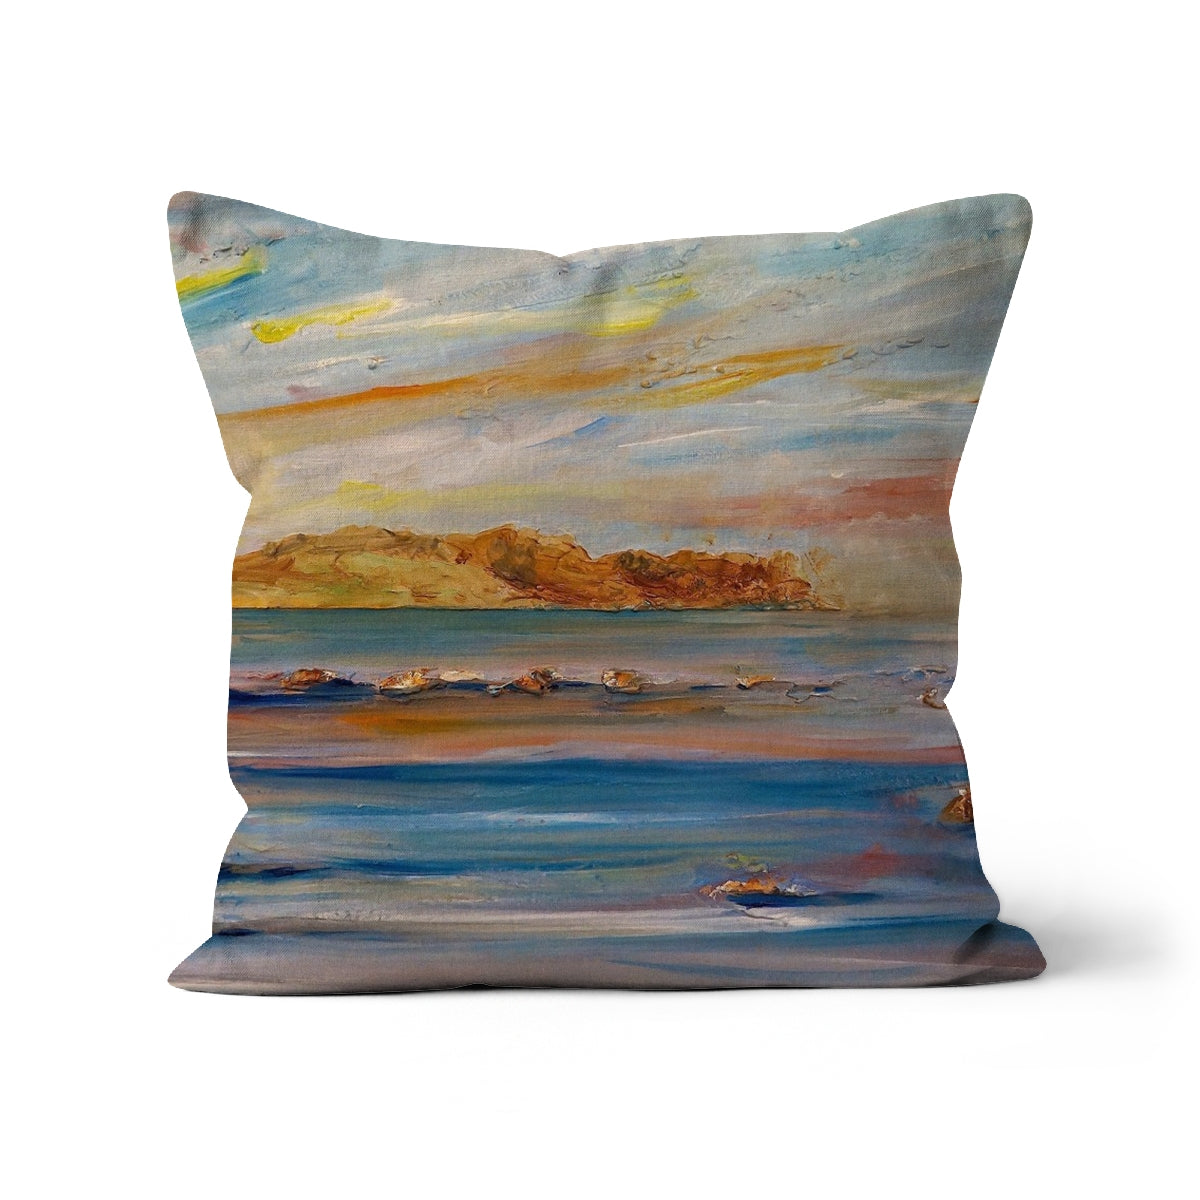 Tiree Dawn Art Gifts Cushion-Cushions-Hebridean Islands Art Gallery-Canvas-16"x16"-Paintings, Prints, Homeware, Art Gifts From Scotland By Scottish Artist Kevin Hunter